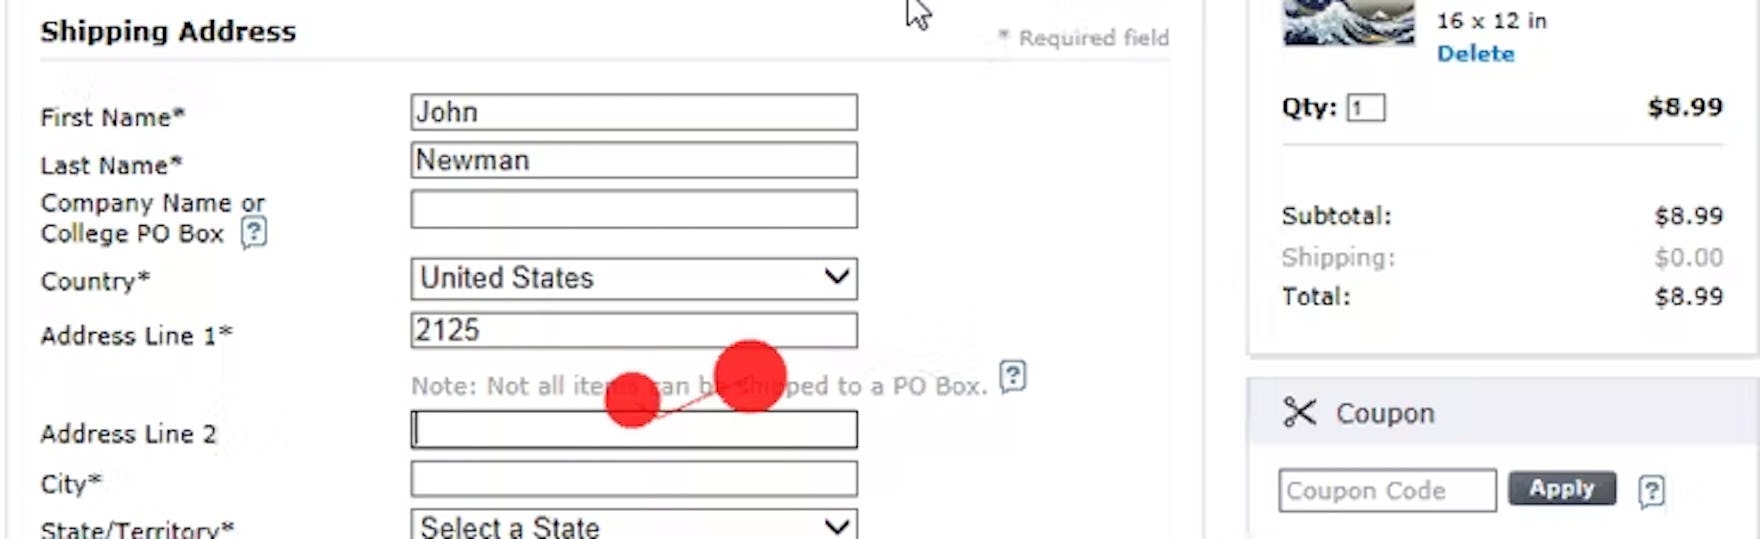 Form Usability: Getting 'Address Line 2' Right – Articles – Baymard  Institute